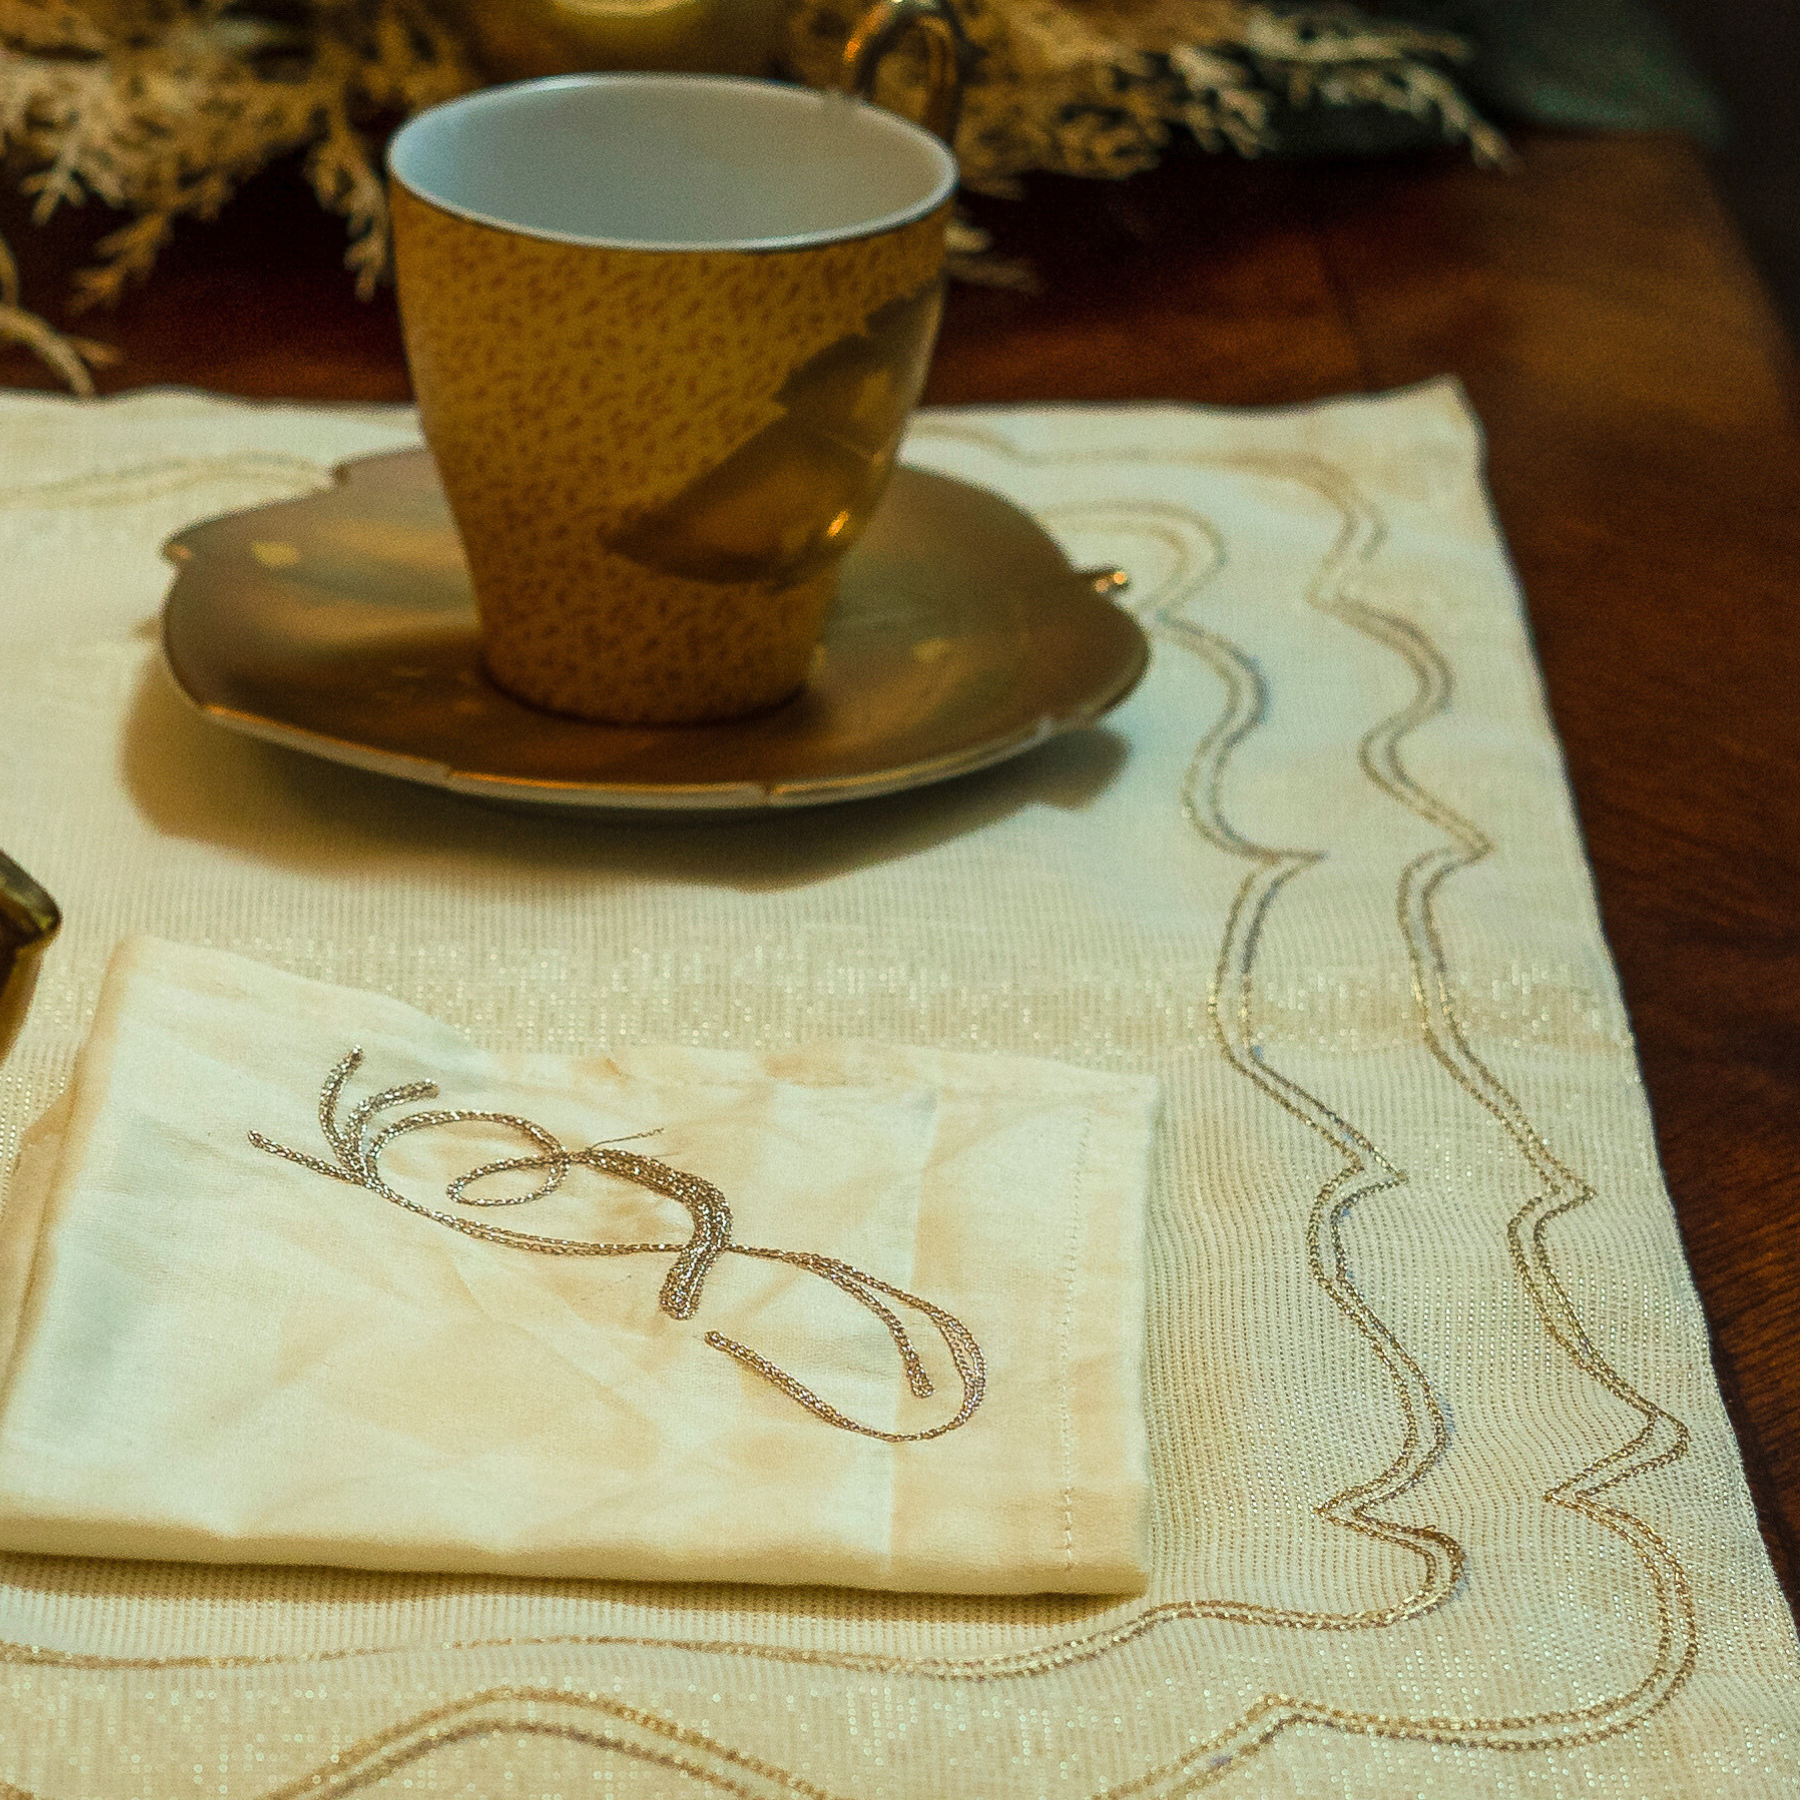 The Luxelife Venetian Placemats